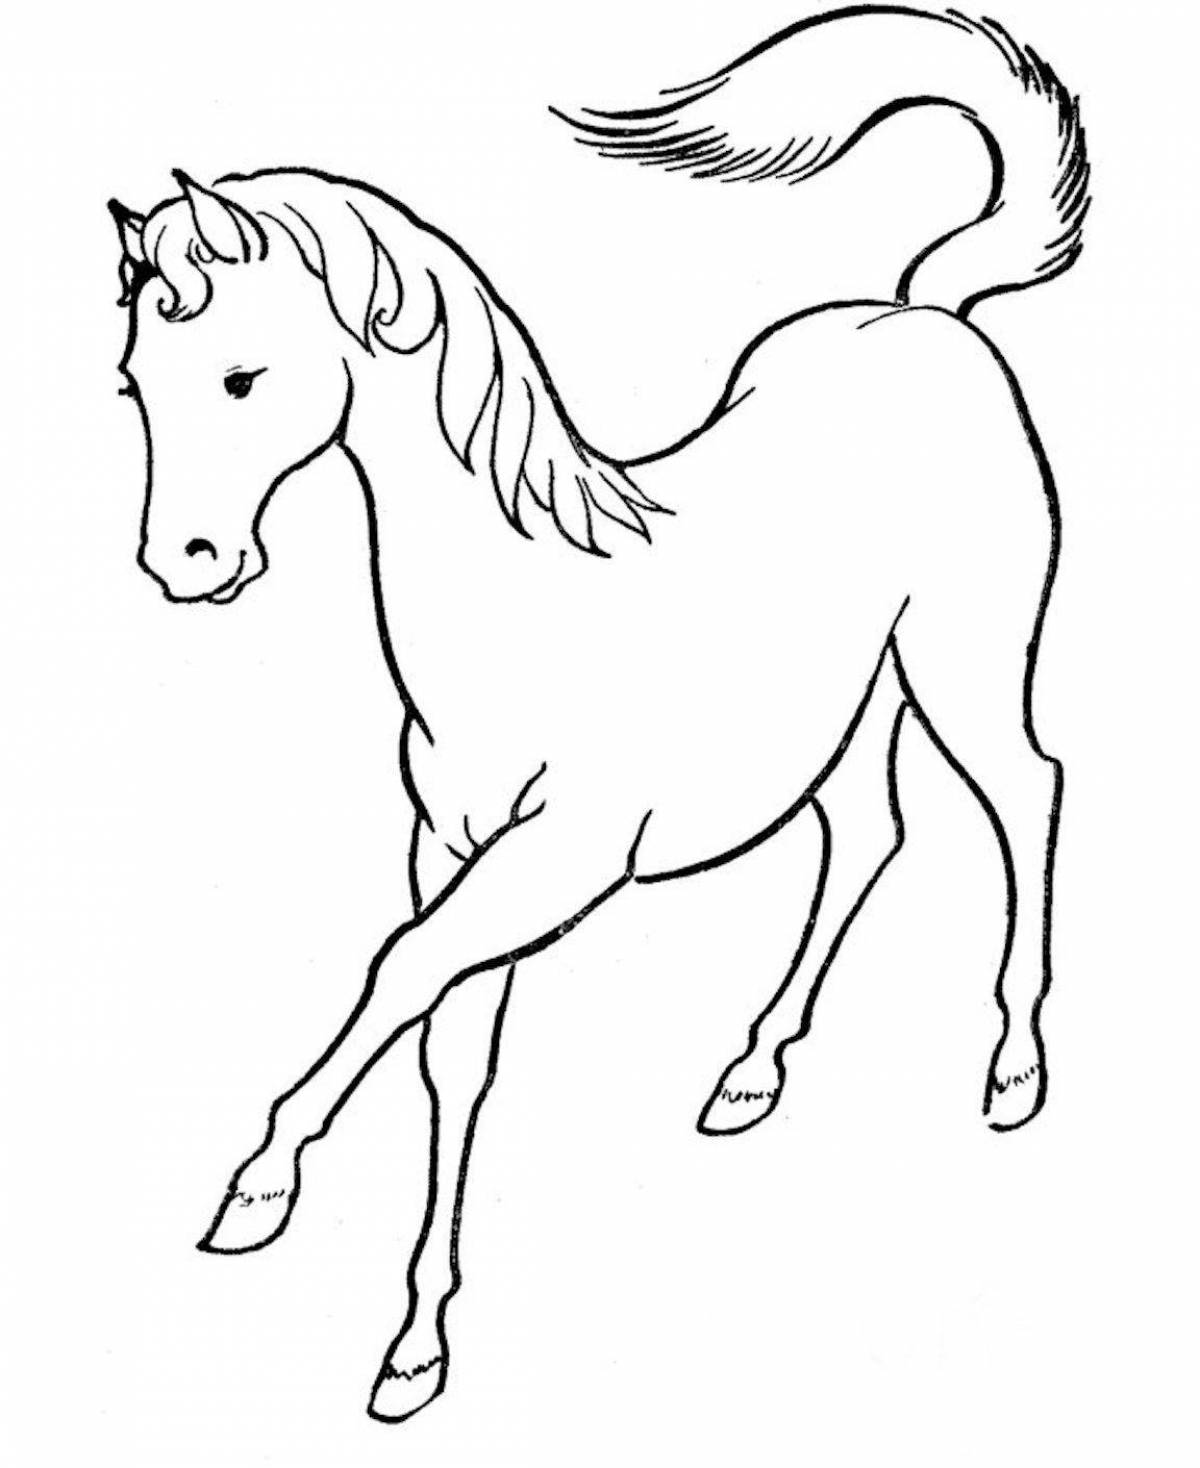 Elegant horse coloring page